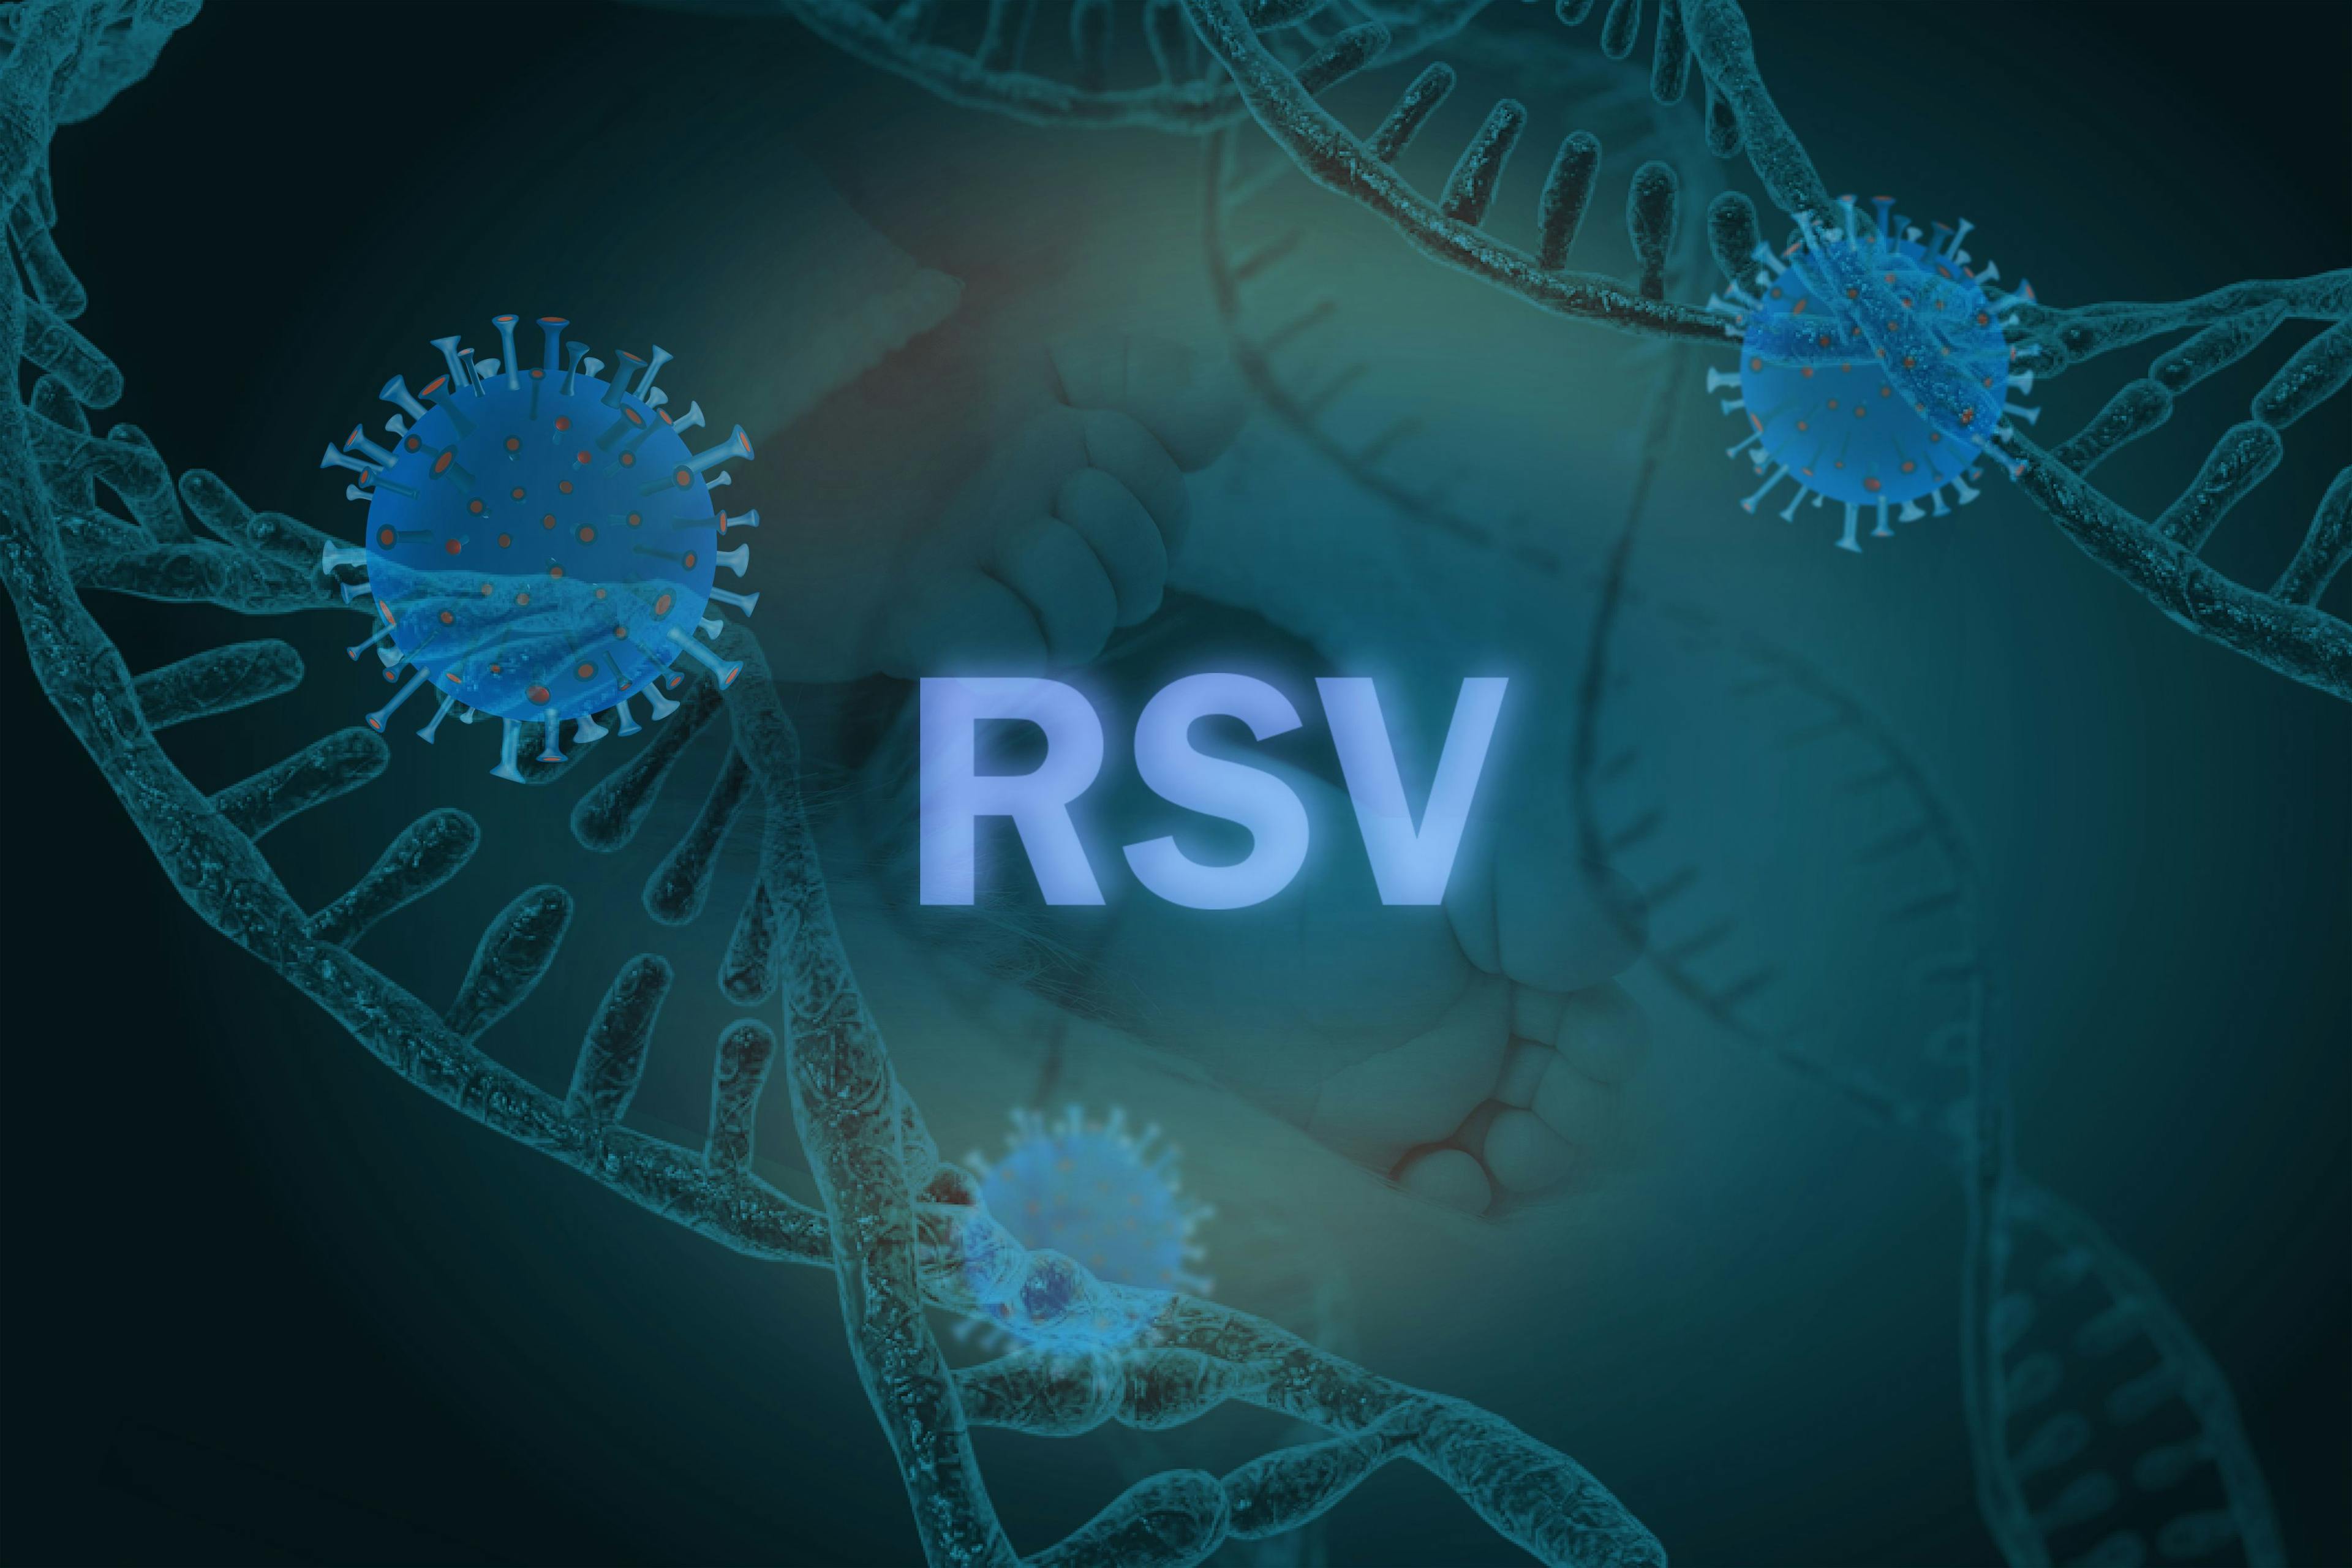 RSV virus and DNA on the background of infant feet | Image Credit: Julia - stock.adobe.com